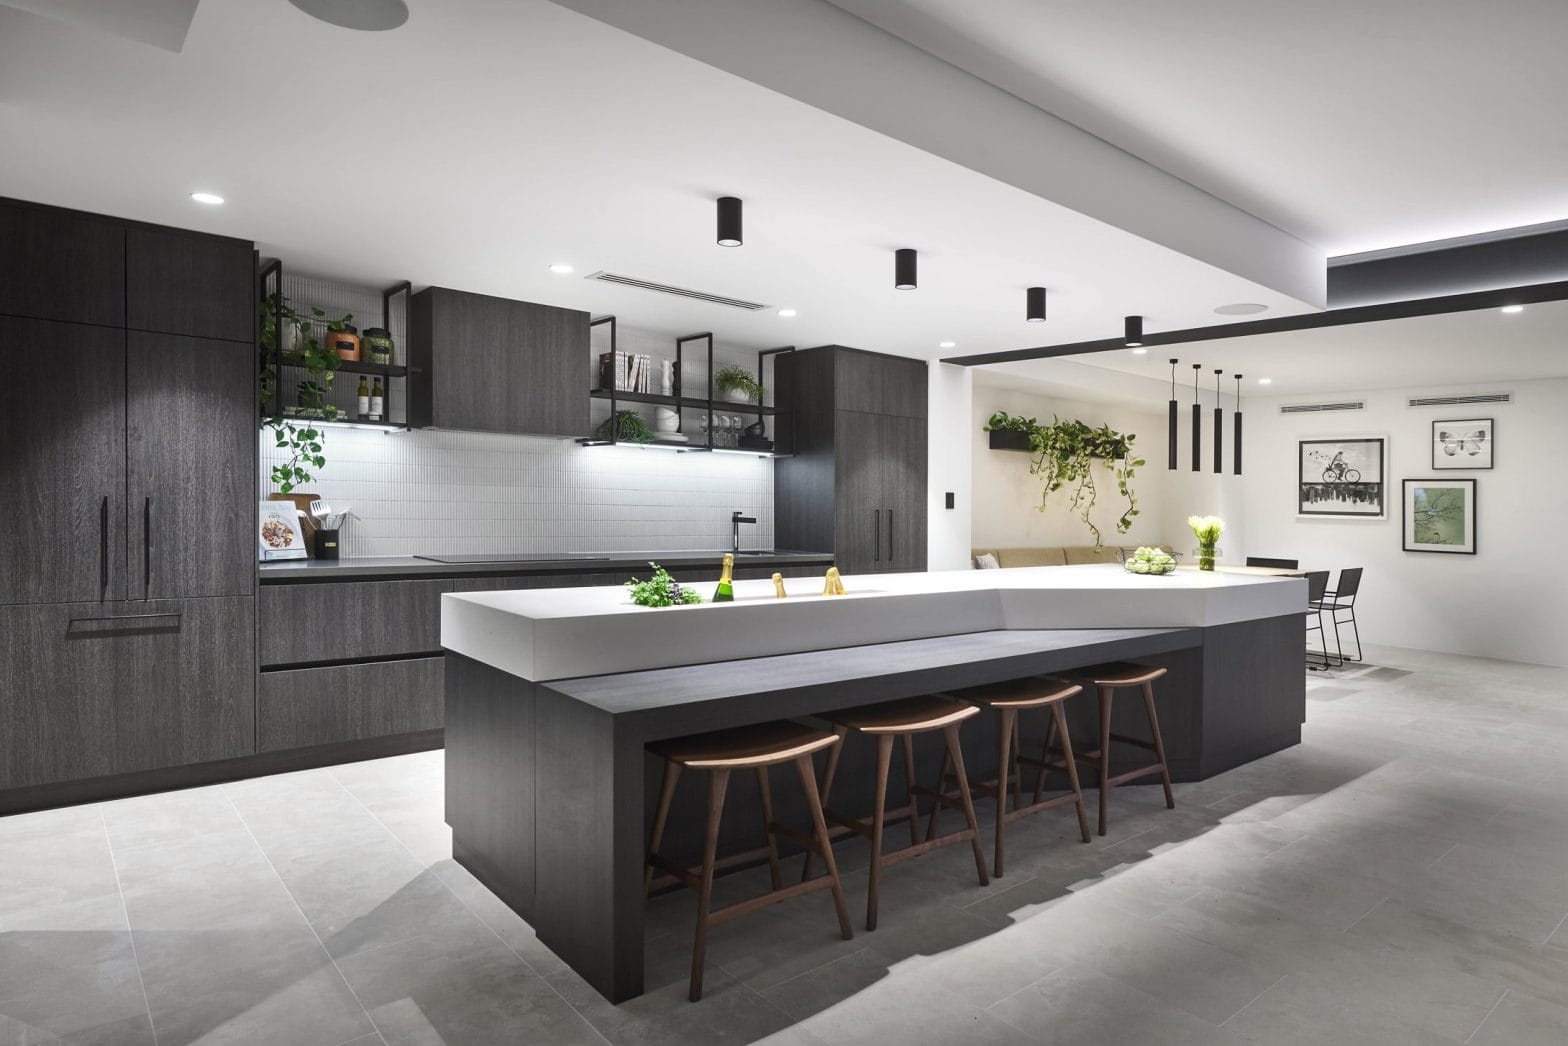 How to find inspiration for your new kitchen